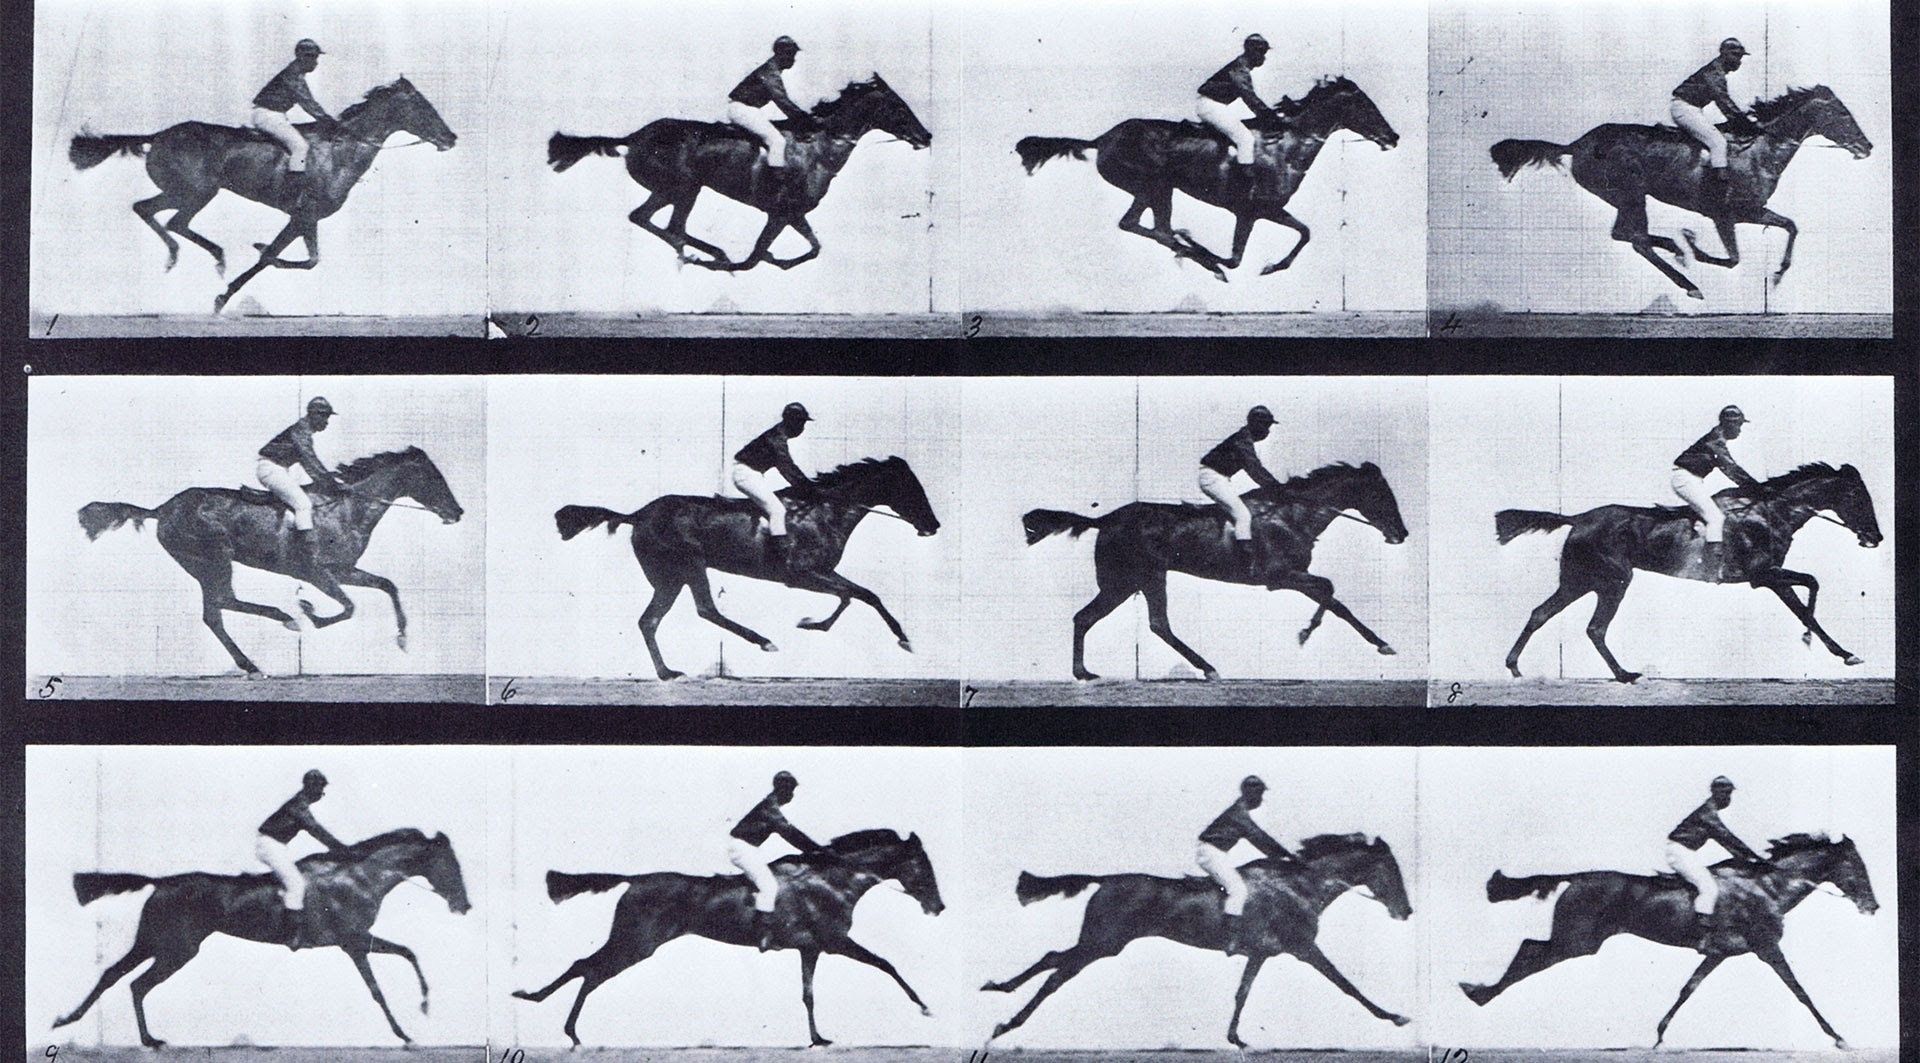 Horse In Motion, Muybridge Frame Rate 